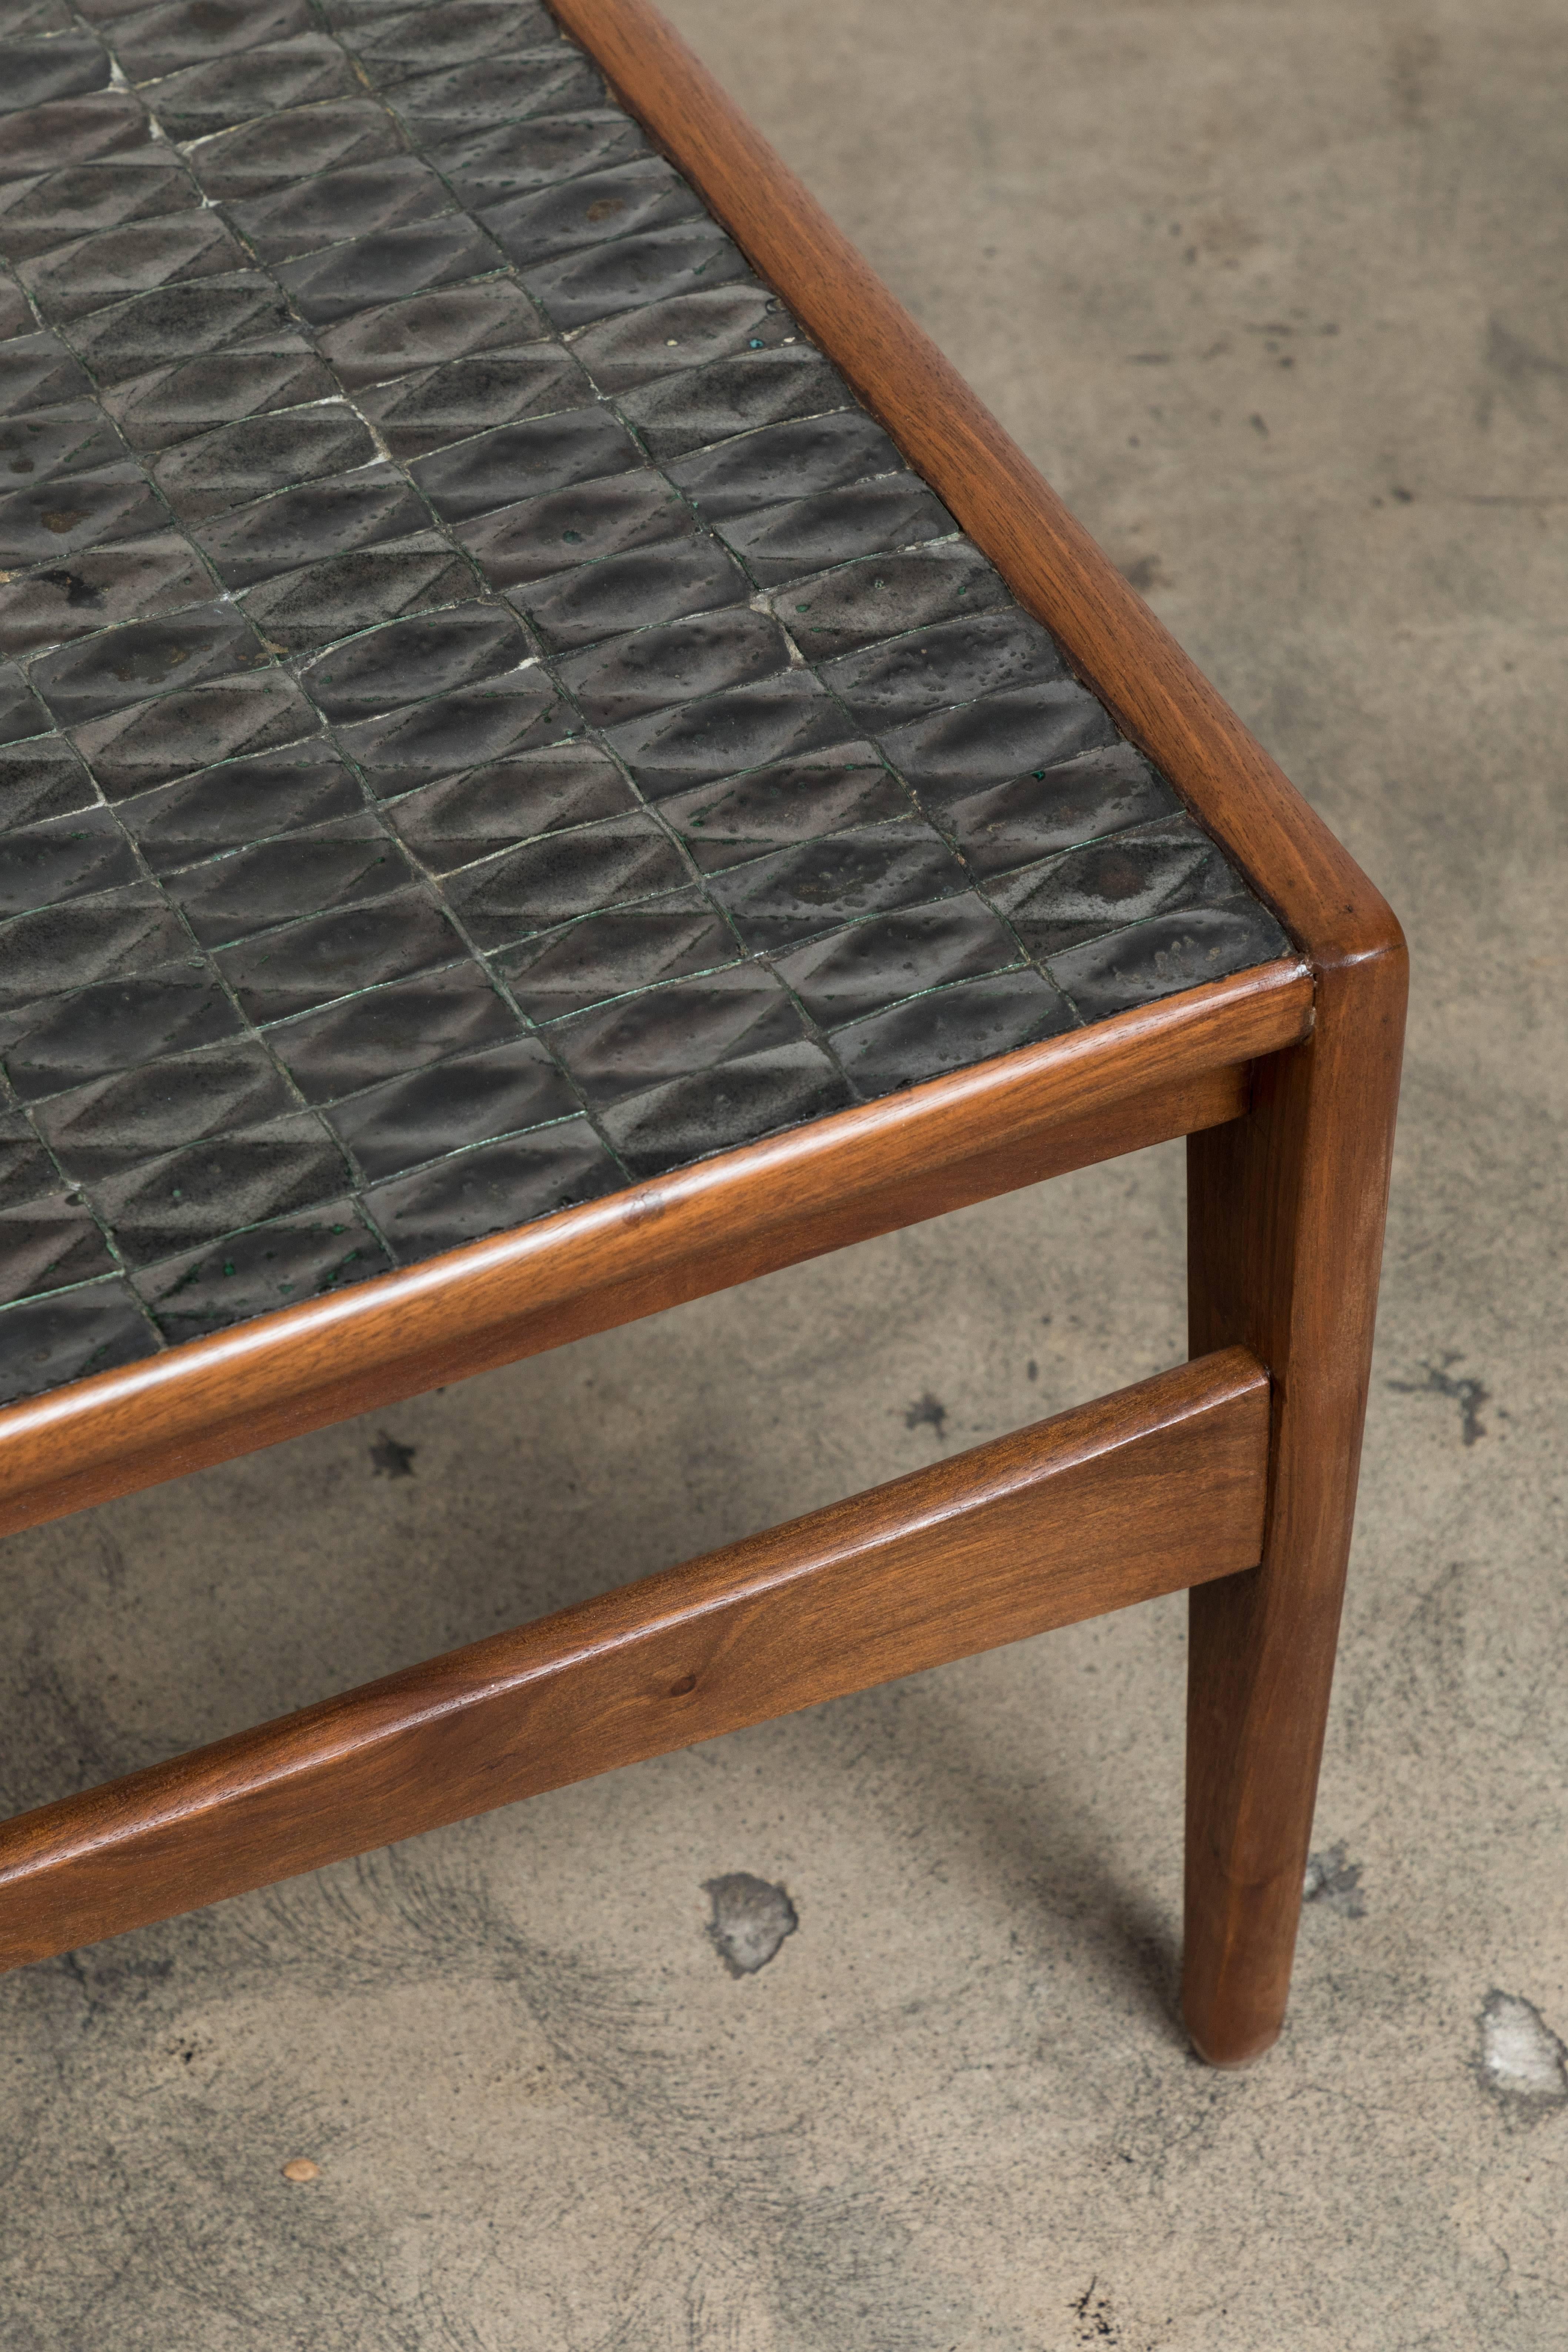 Spanish Walnut and Oxidized Tile Coffee Table 1